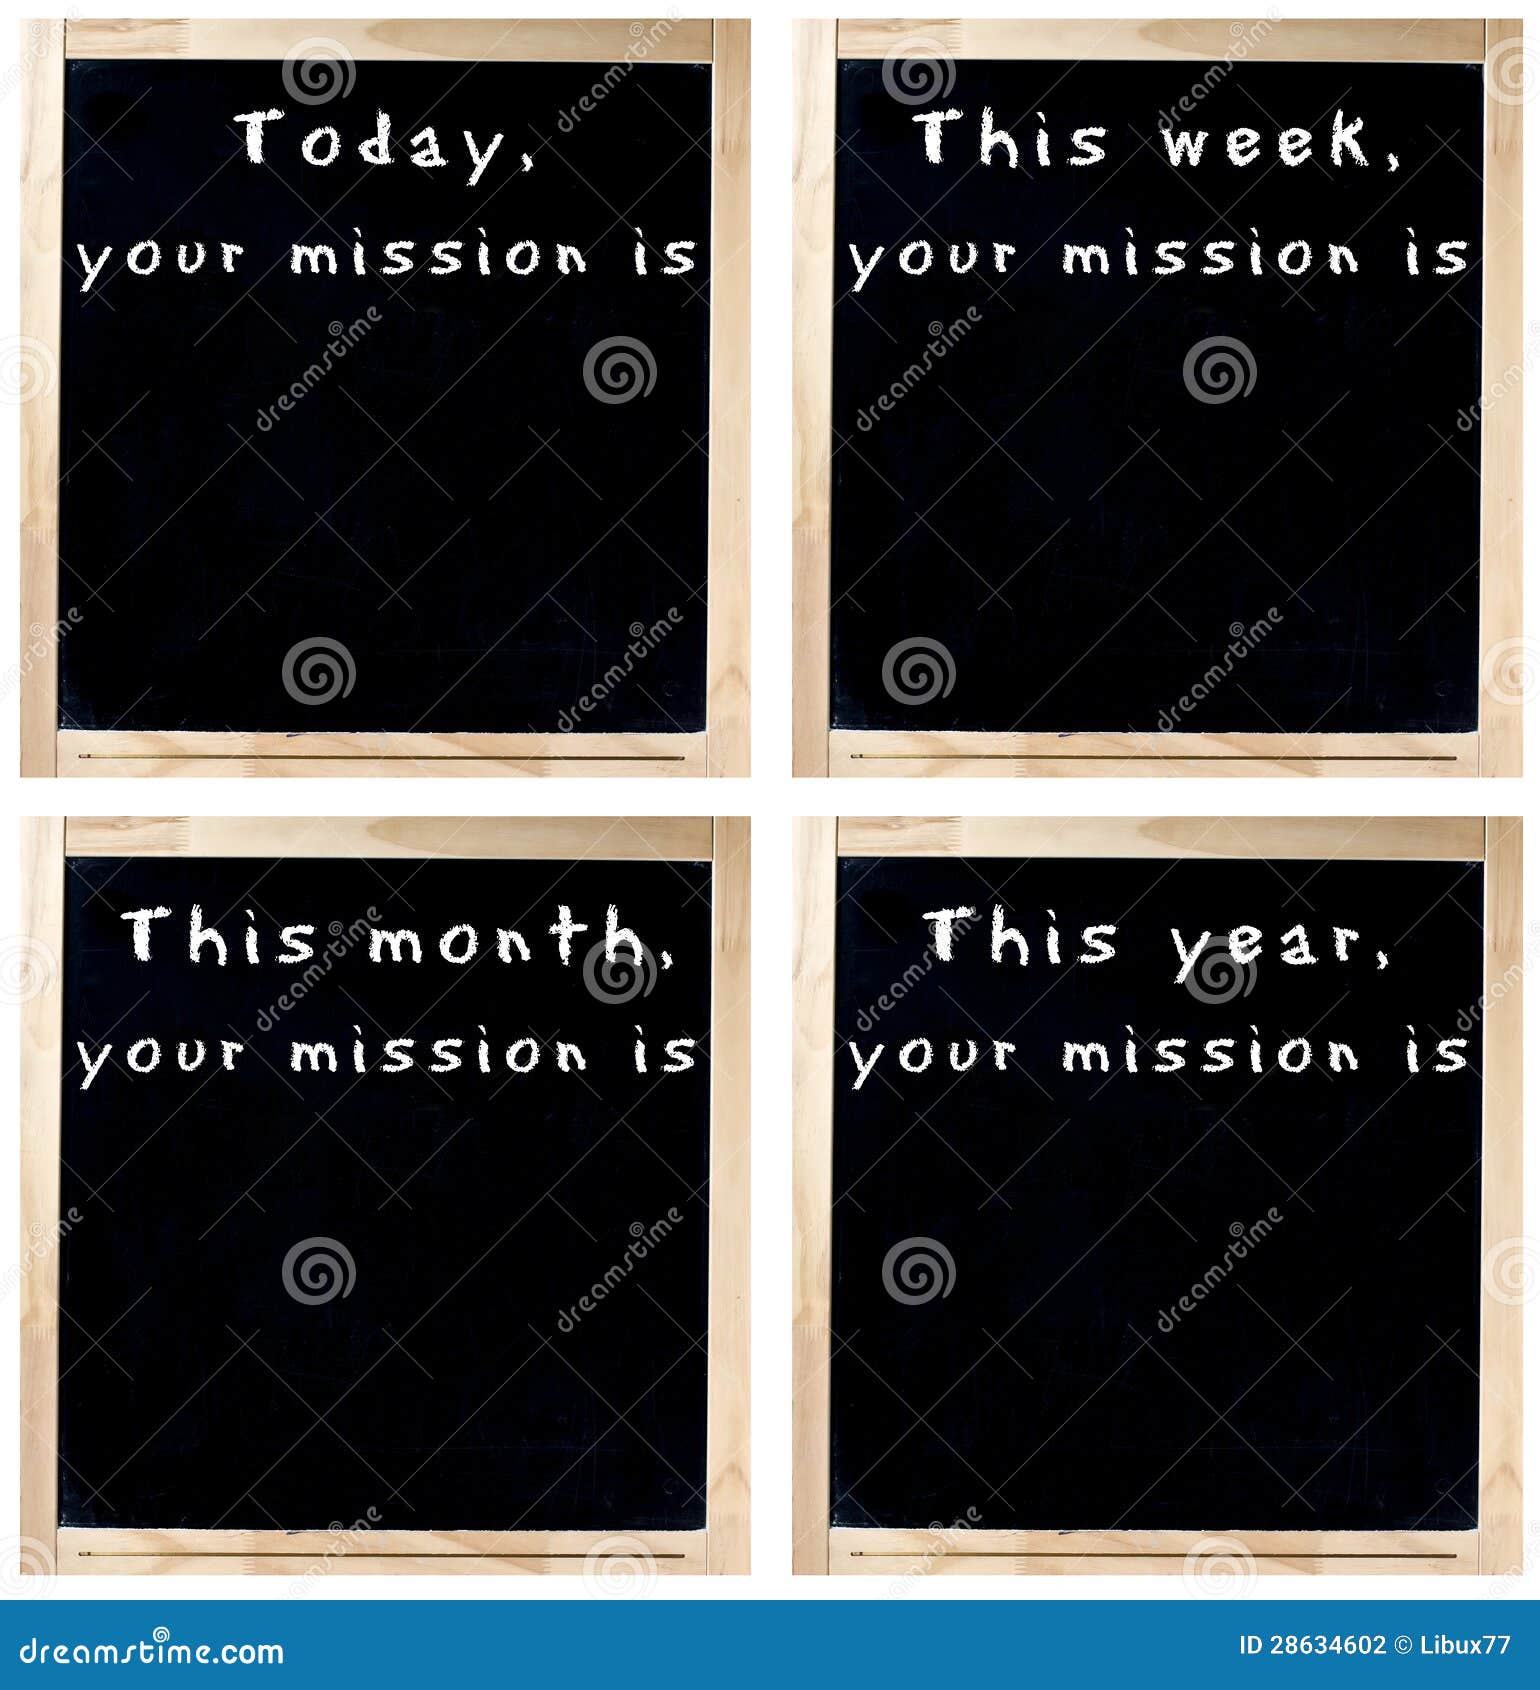 your mission on chalkboard